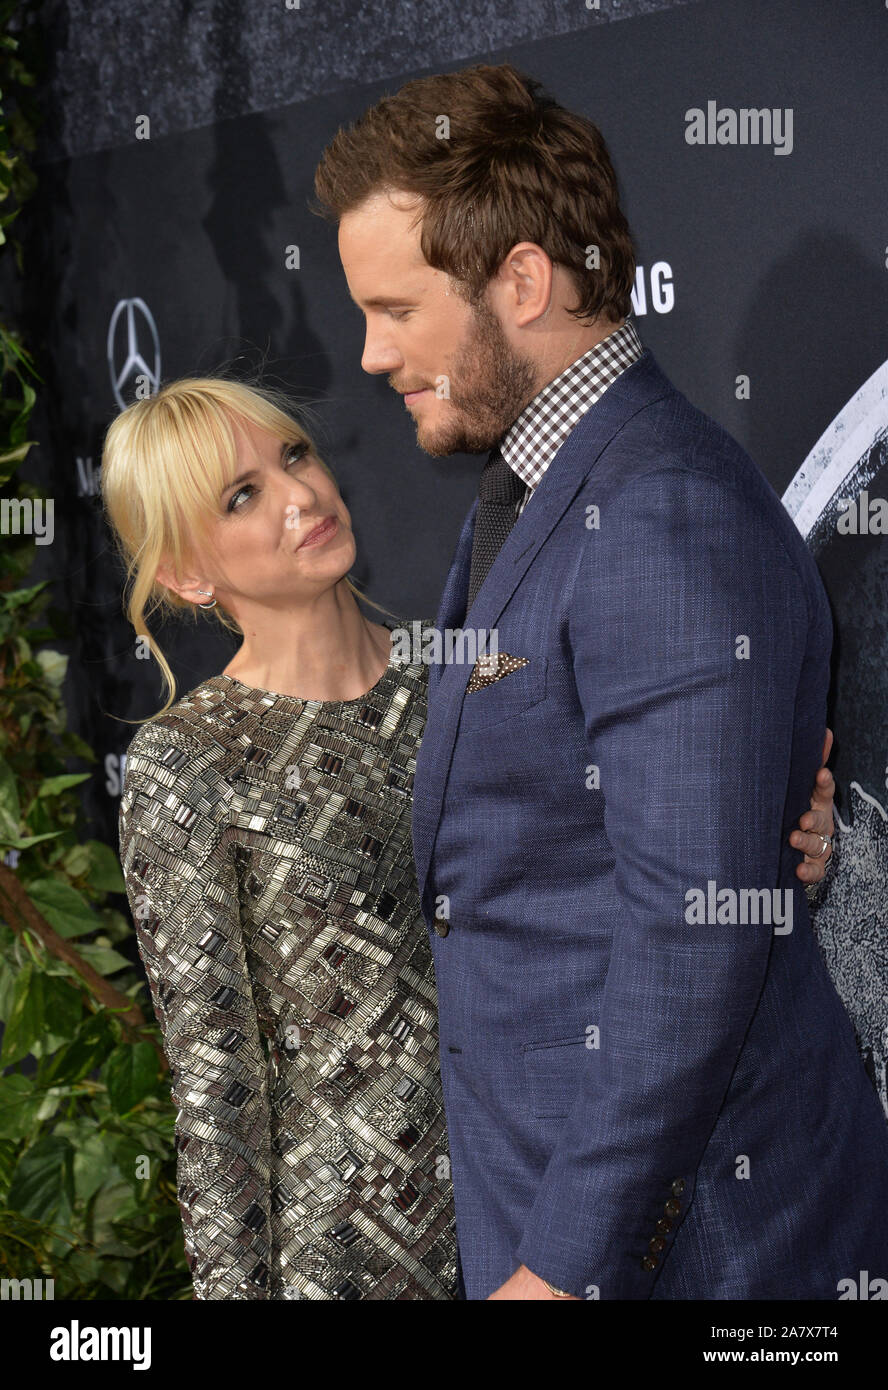 LOS ANGELES, CA - JUNE 10, 2015: Chris Pratt & wife Anna Faris at the world premiere of his movie "Jurassic World" at the Dolby Theatre, Hollywood. © 2015 Paul Smith / Featureflash Stock Photo